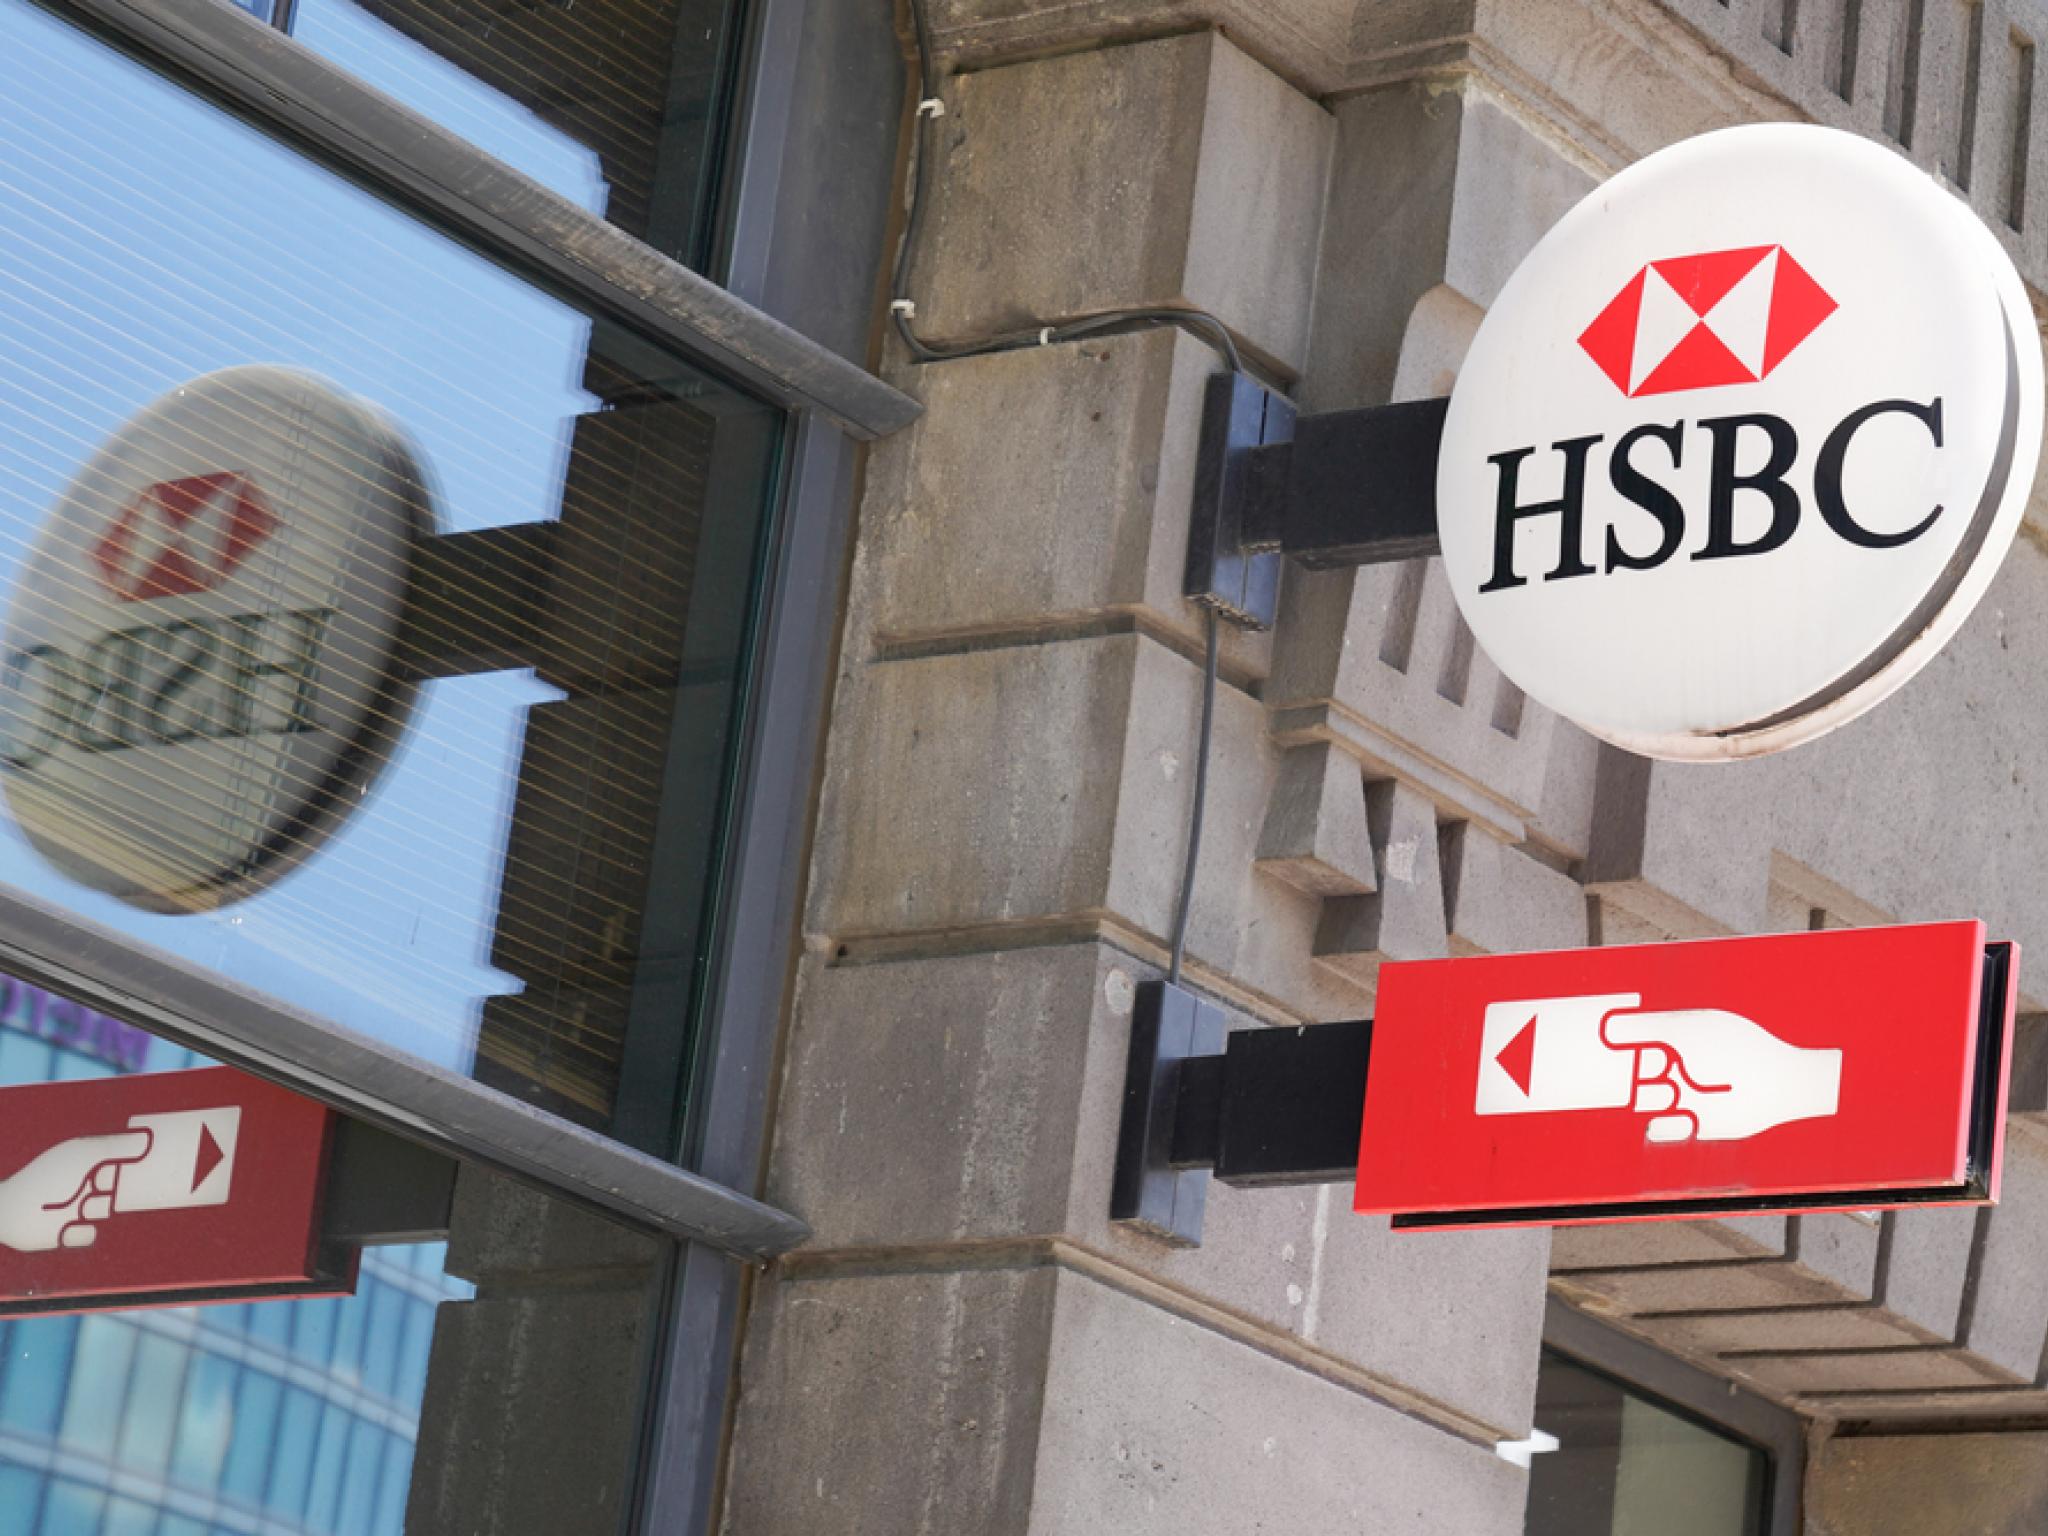  adios-argentina-hsbc-divests-banking-operations-in-argentina-for-550m 